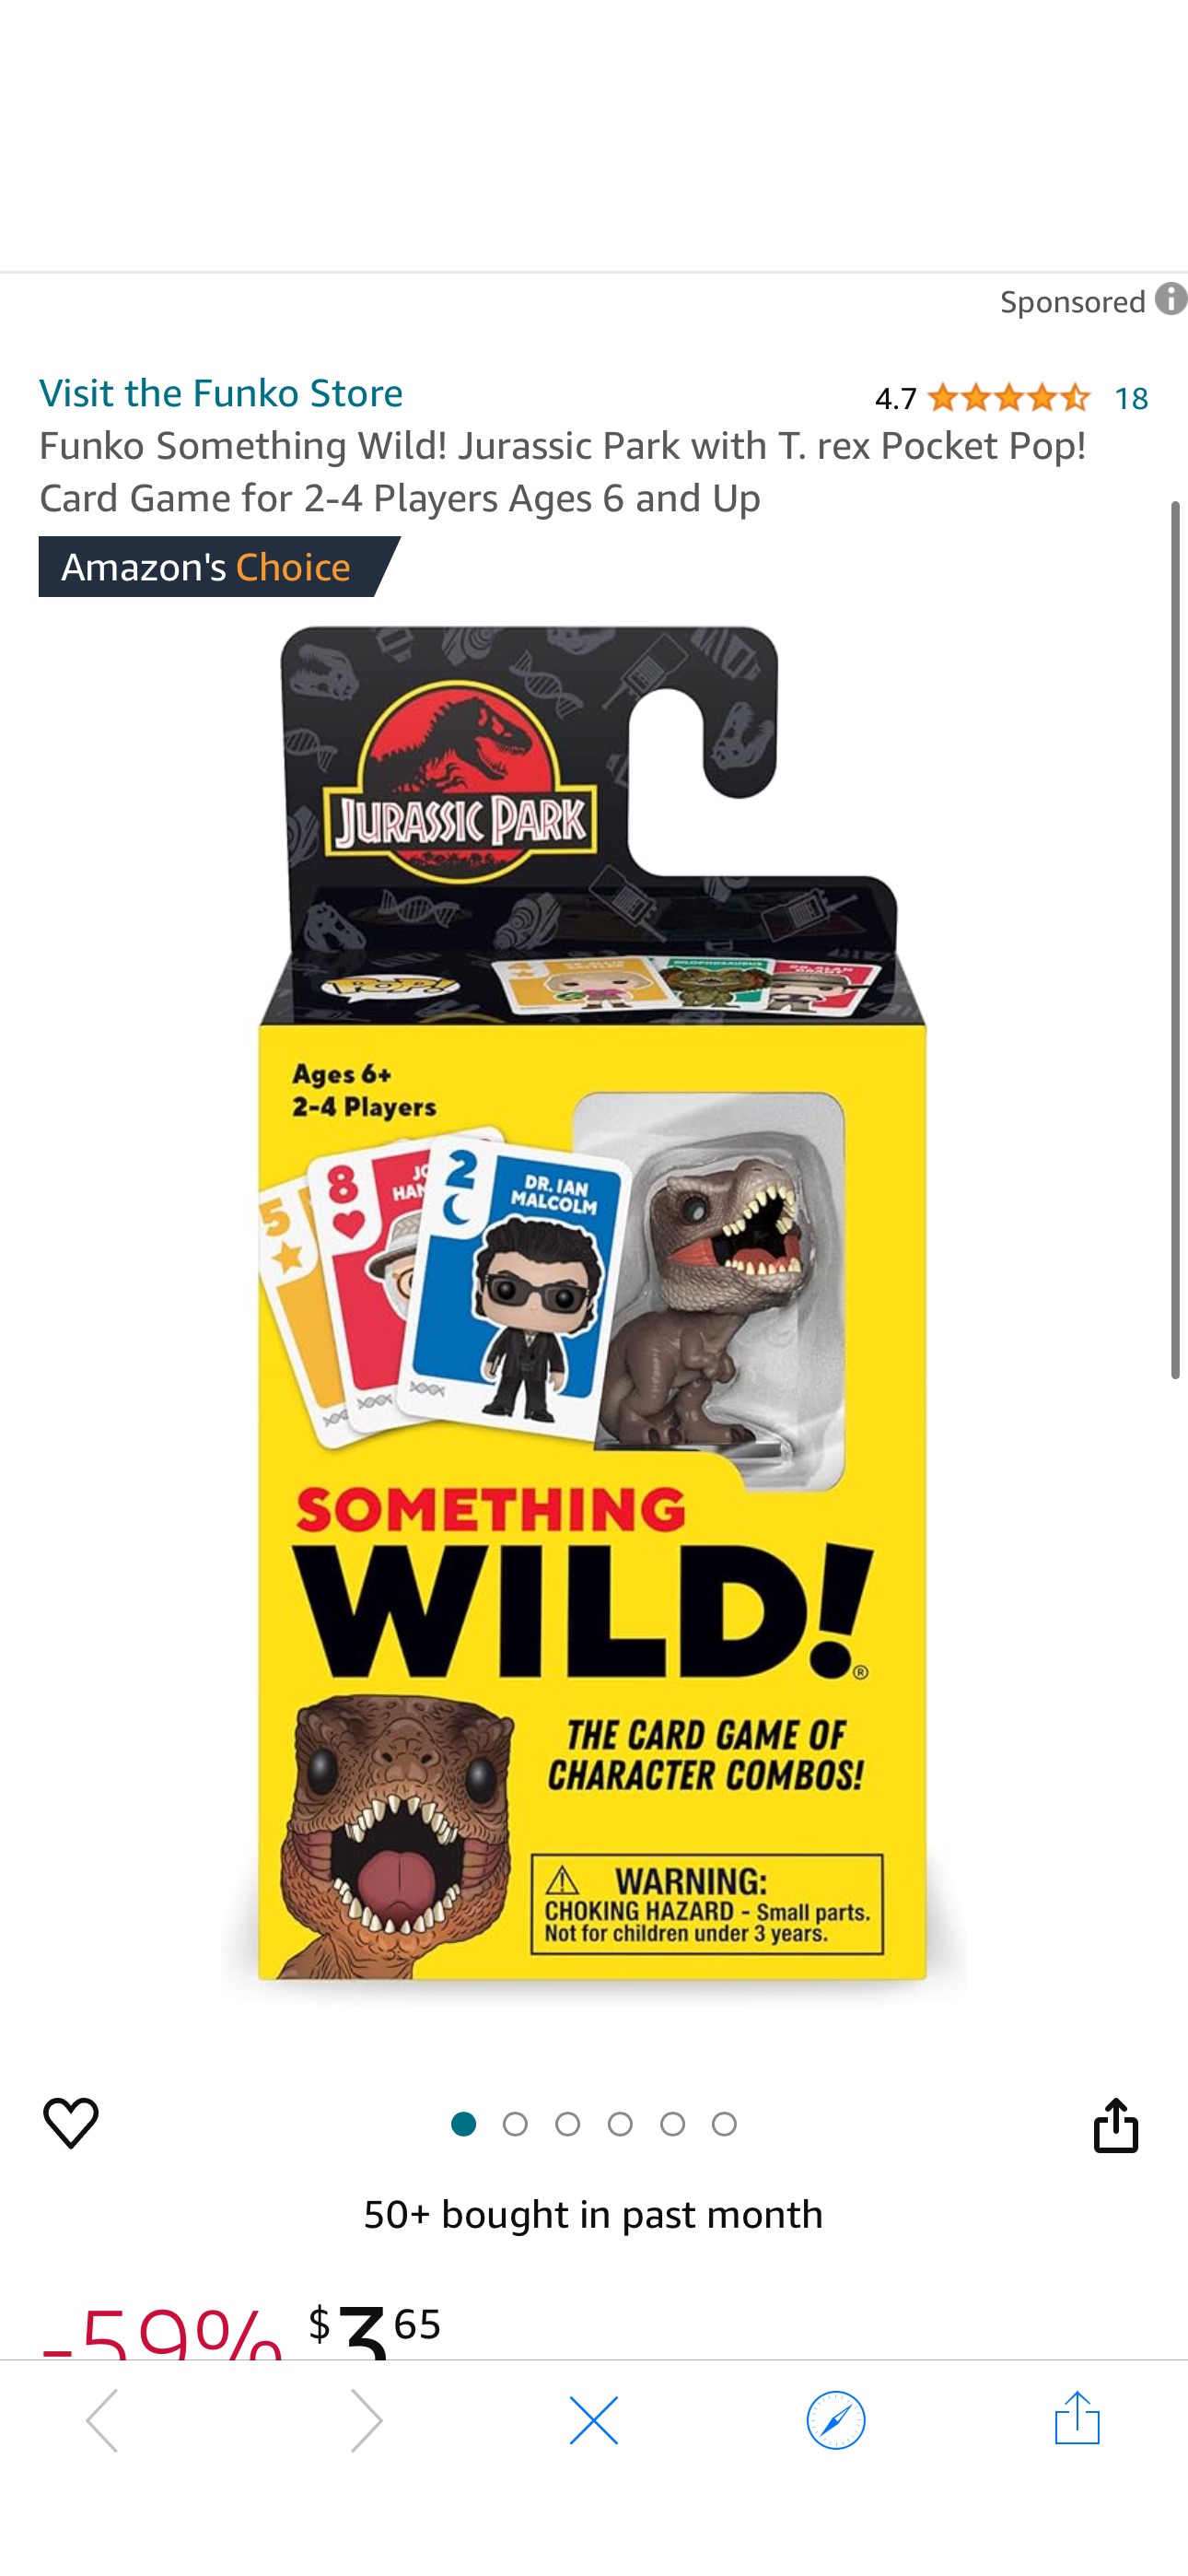 Amazon.com: Funko Something Wild! Jurassic Park with T. rex Pocket Pop! Card Game for 2-4 Players Ages 6 and Up : Toys & Games